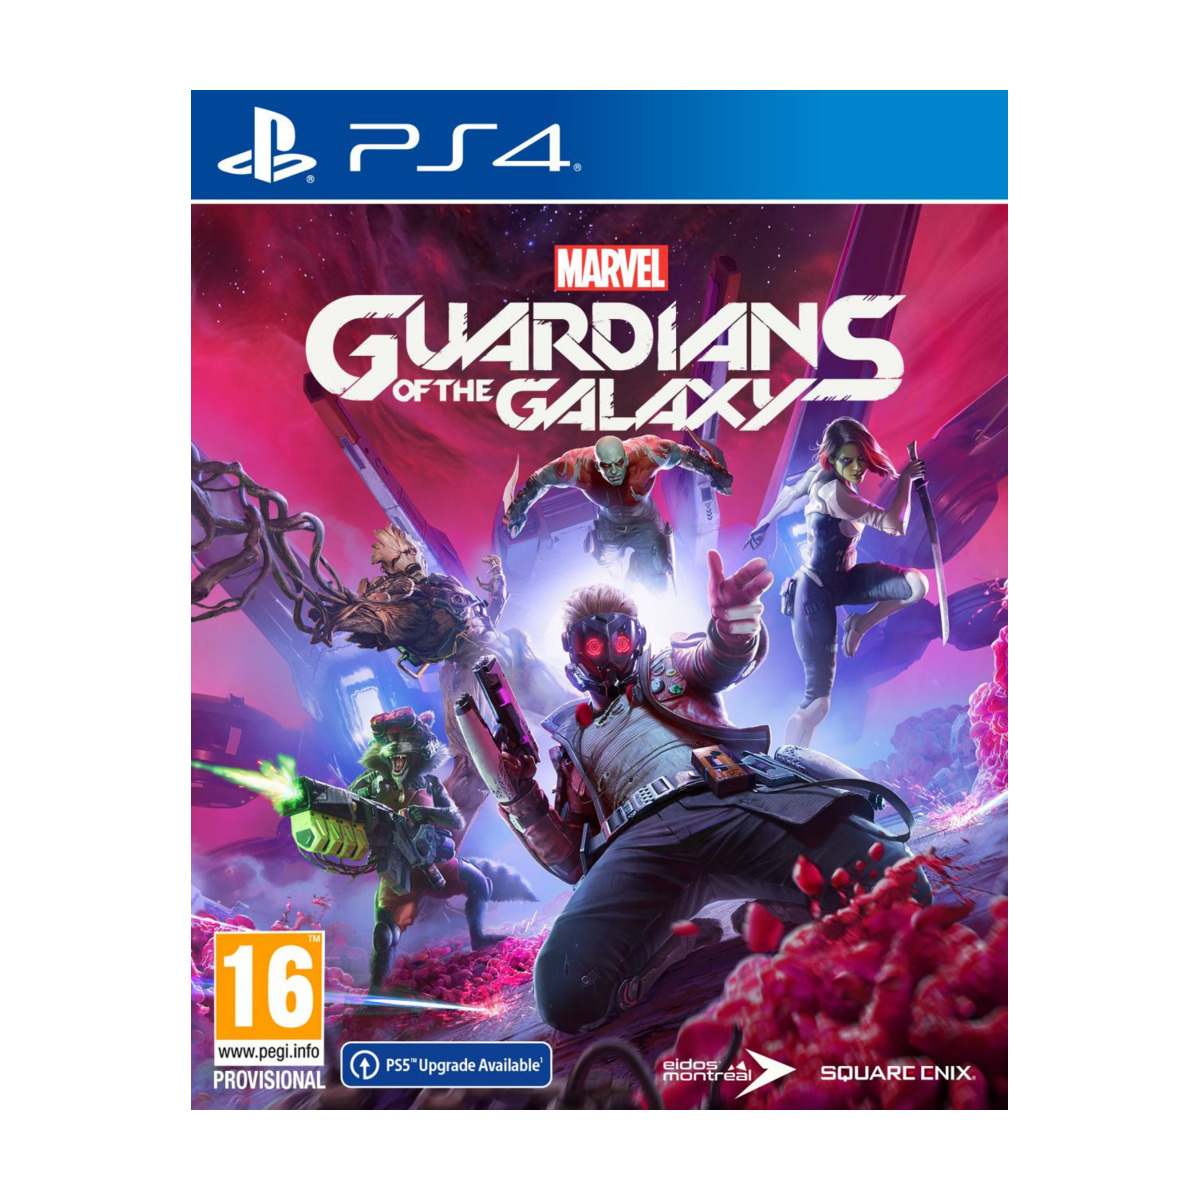 Komprimere affjedring ulykke MARVEL'S GUARDIANS OF THE GALAXY (PS4) - Power.dk